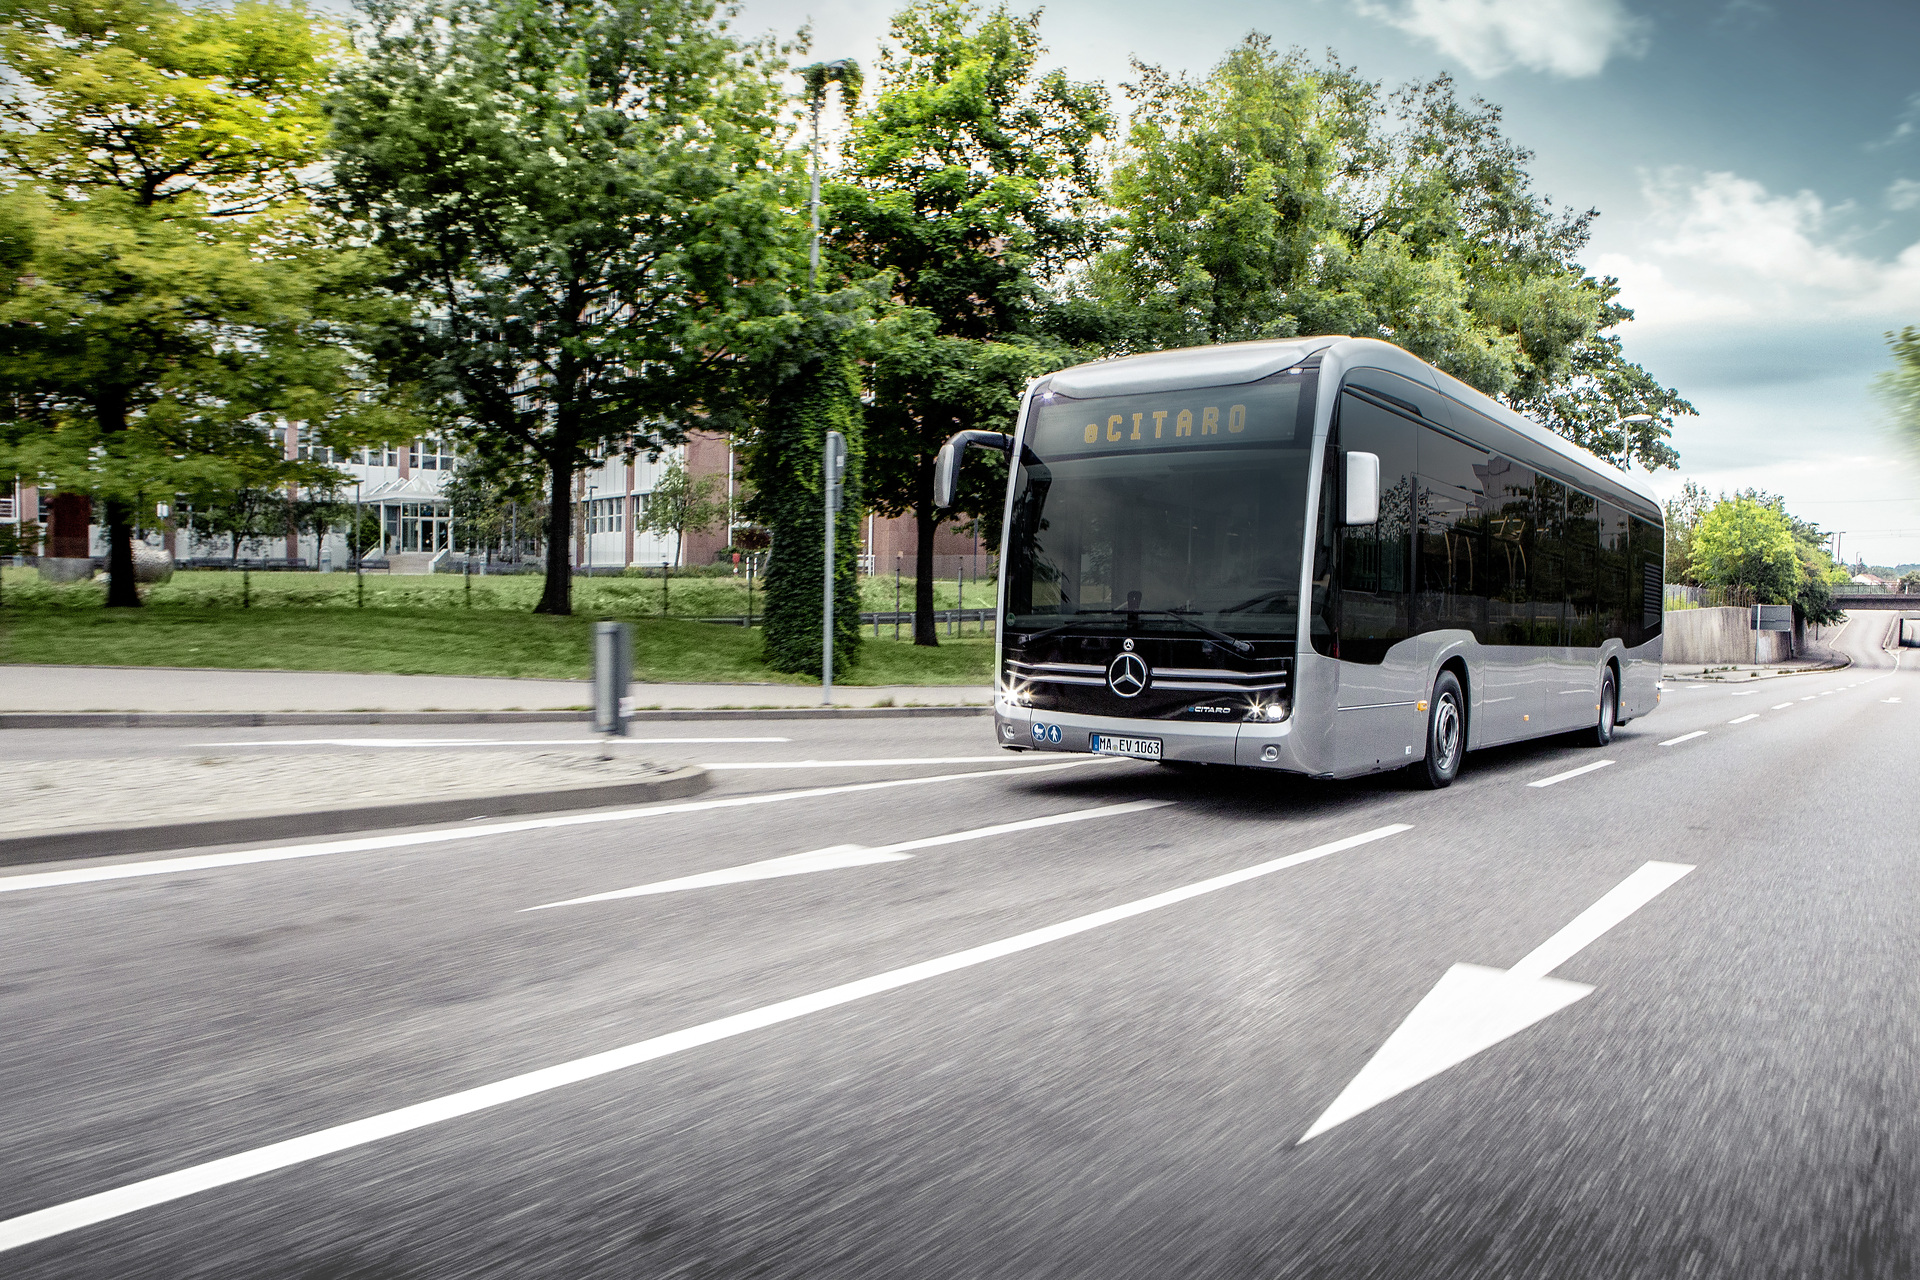 Mercedes Benz eCitaro: On the safe side in the electric bus: the all-round safety concept of the Mercedes-Benz eCitaro - from employee training to rescue guidelines